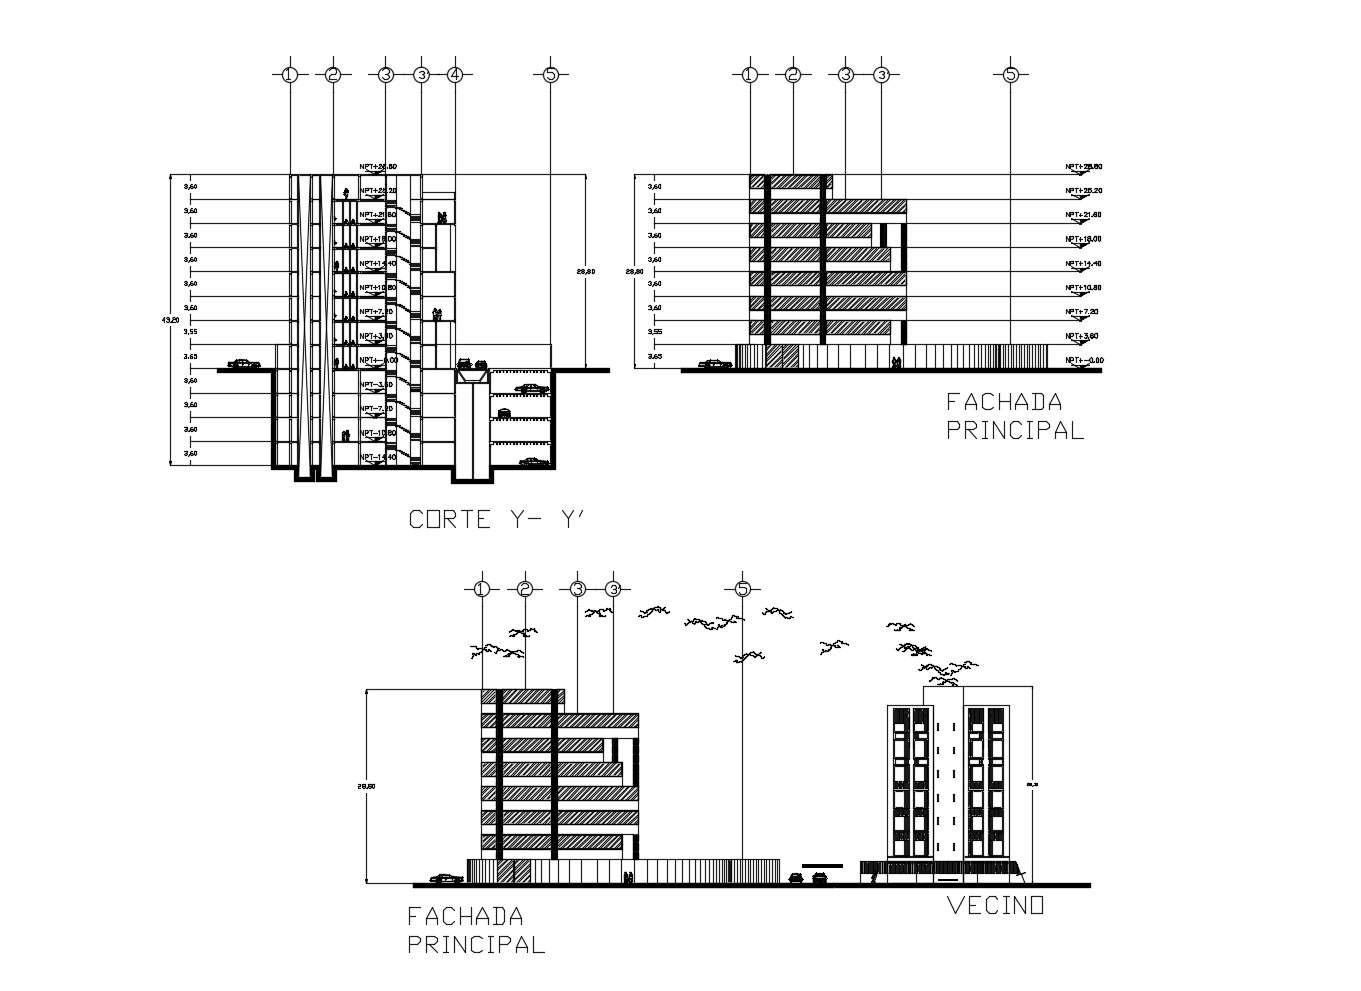  Download  Free  Building  elevation  design  in DWG file Cadbull